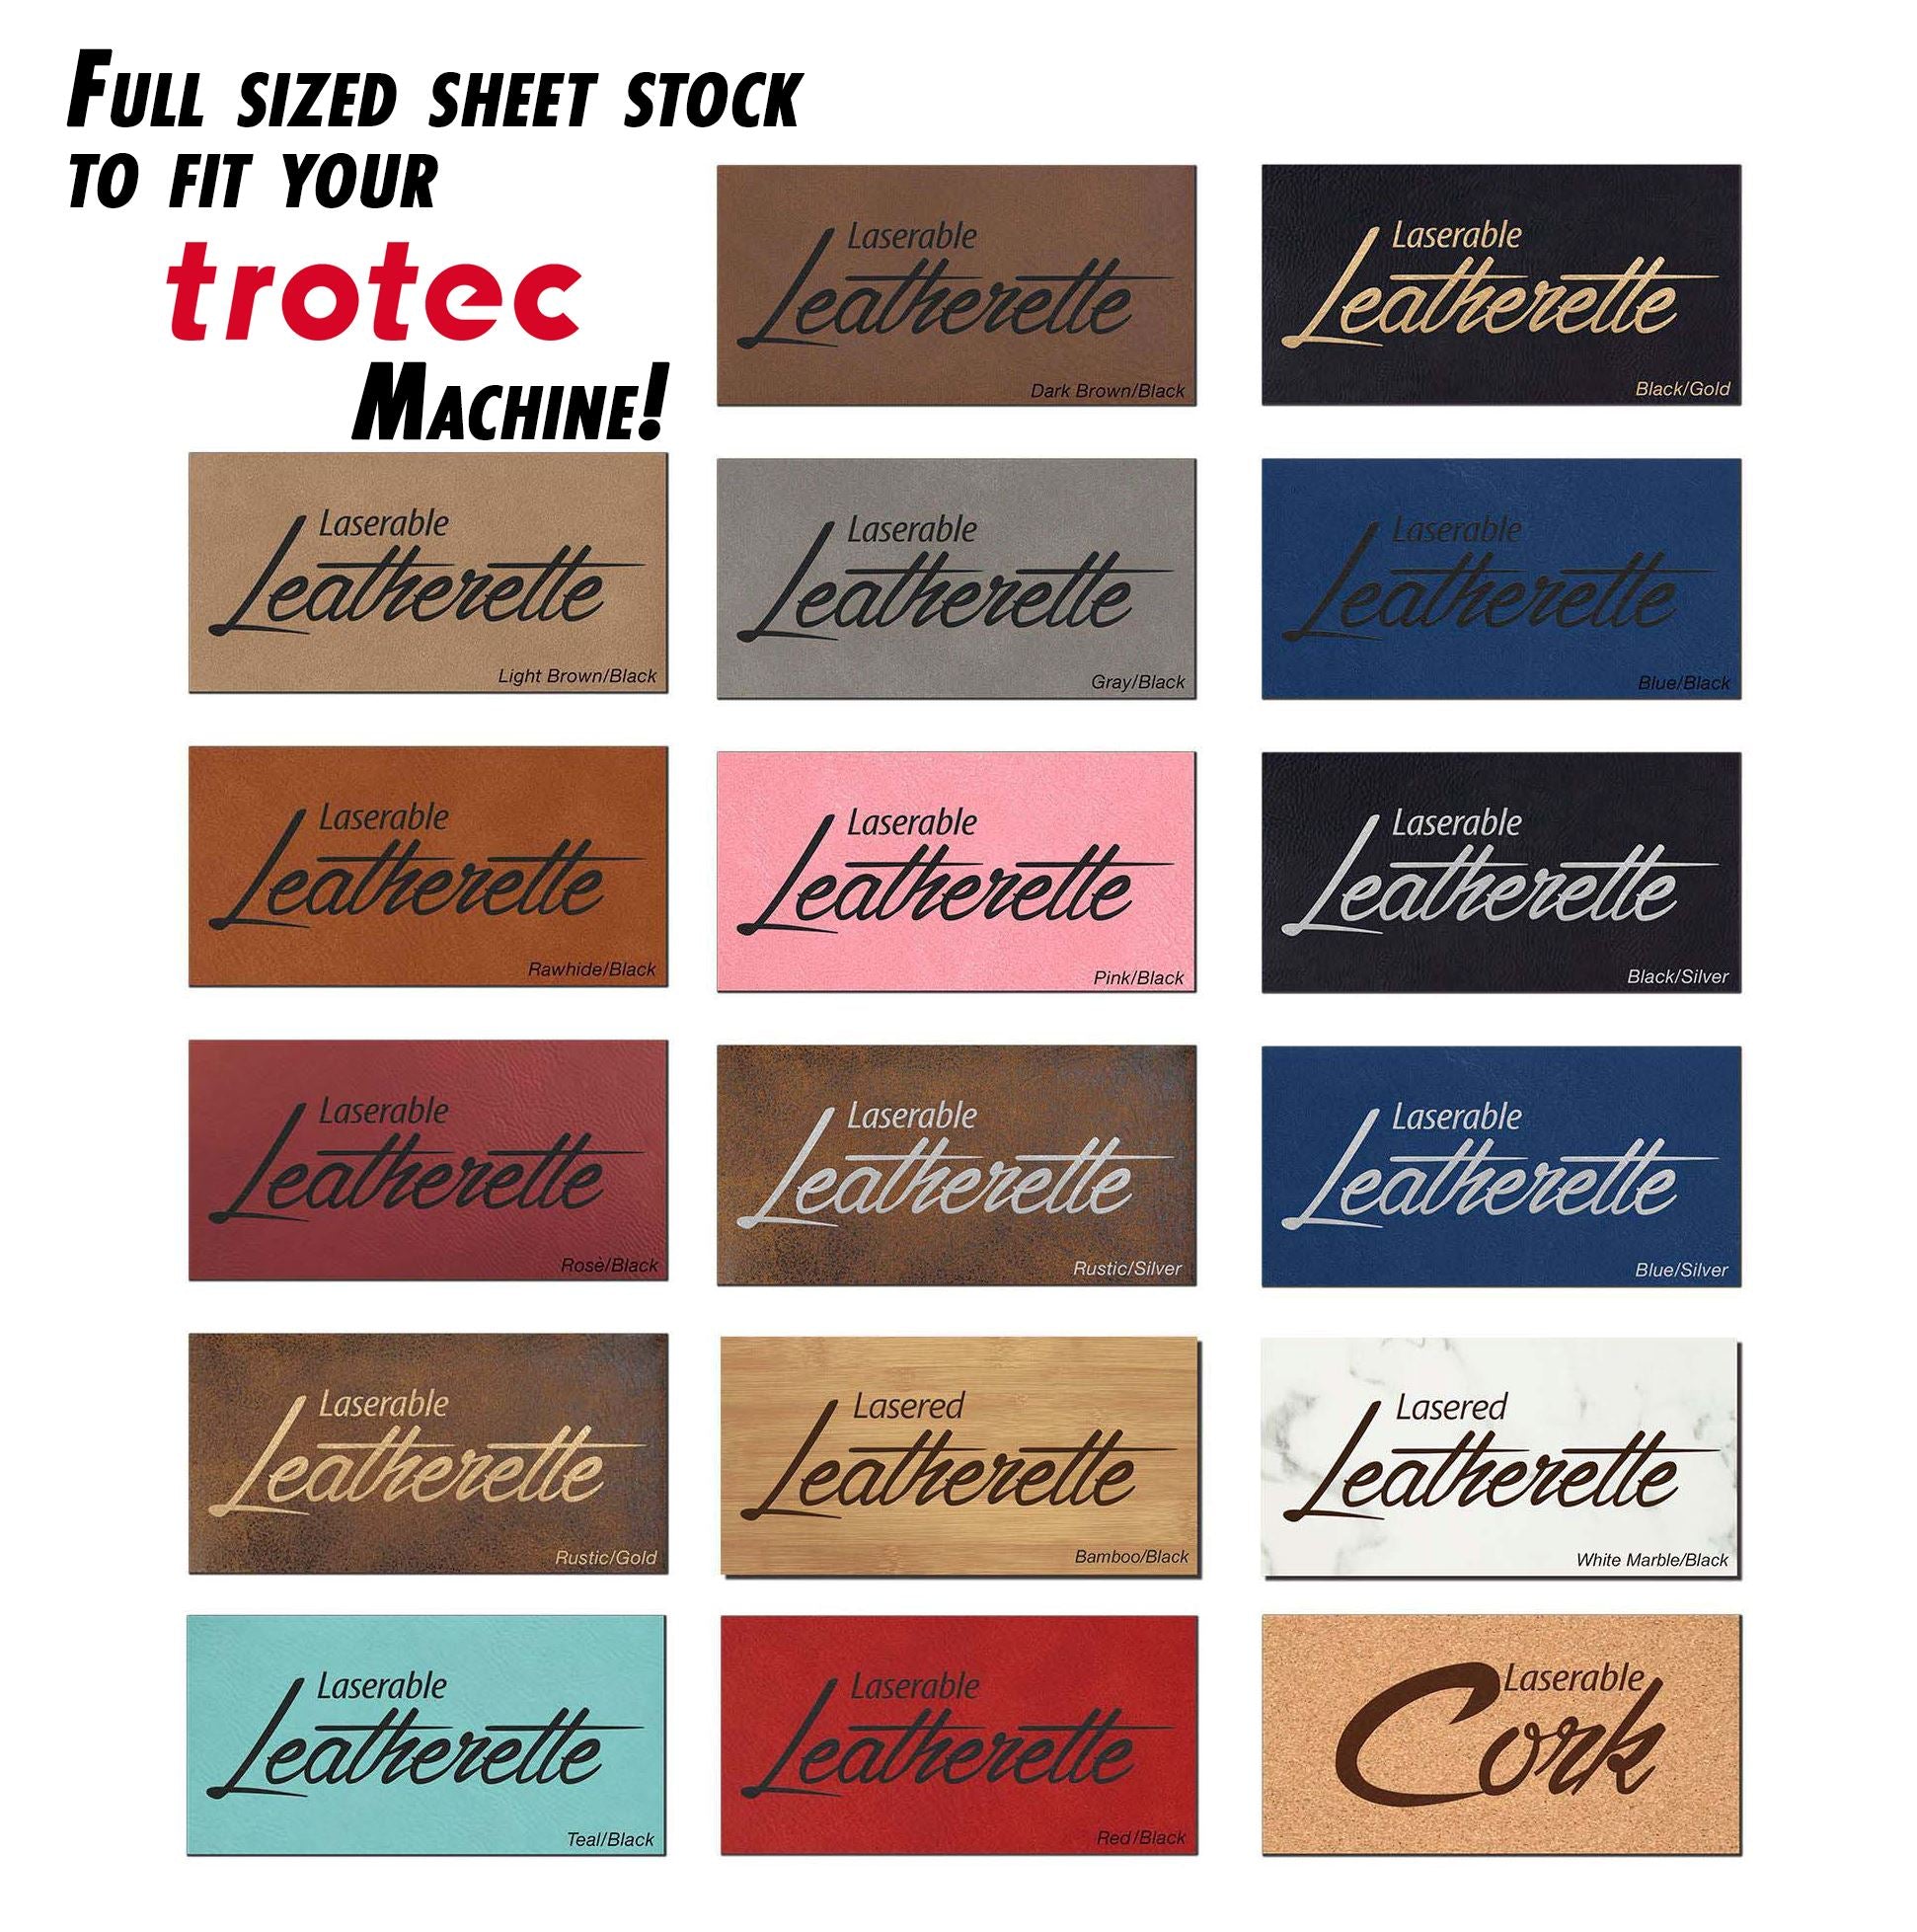 Full Size Laserable Leatherette Sheet Stock, Trotec Laser Engravers Sheet Stock Craftworks NW 